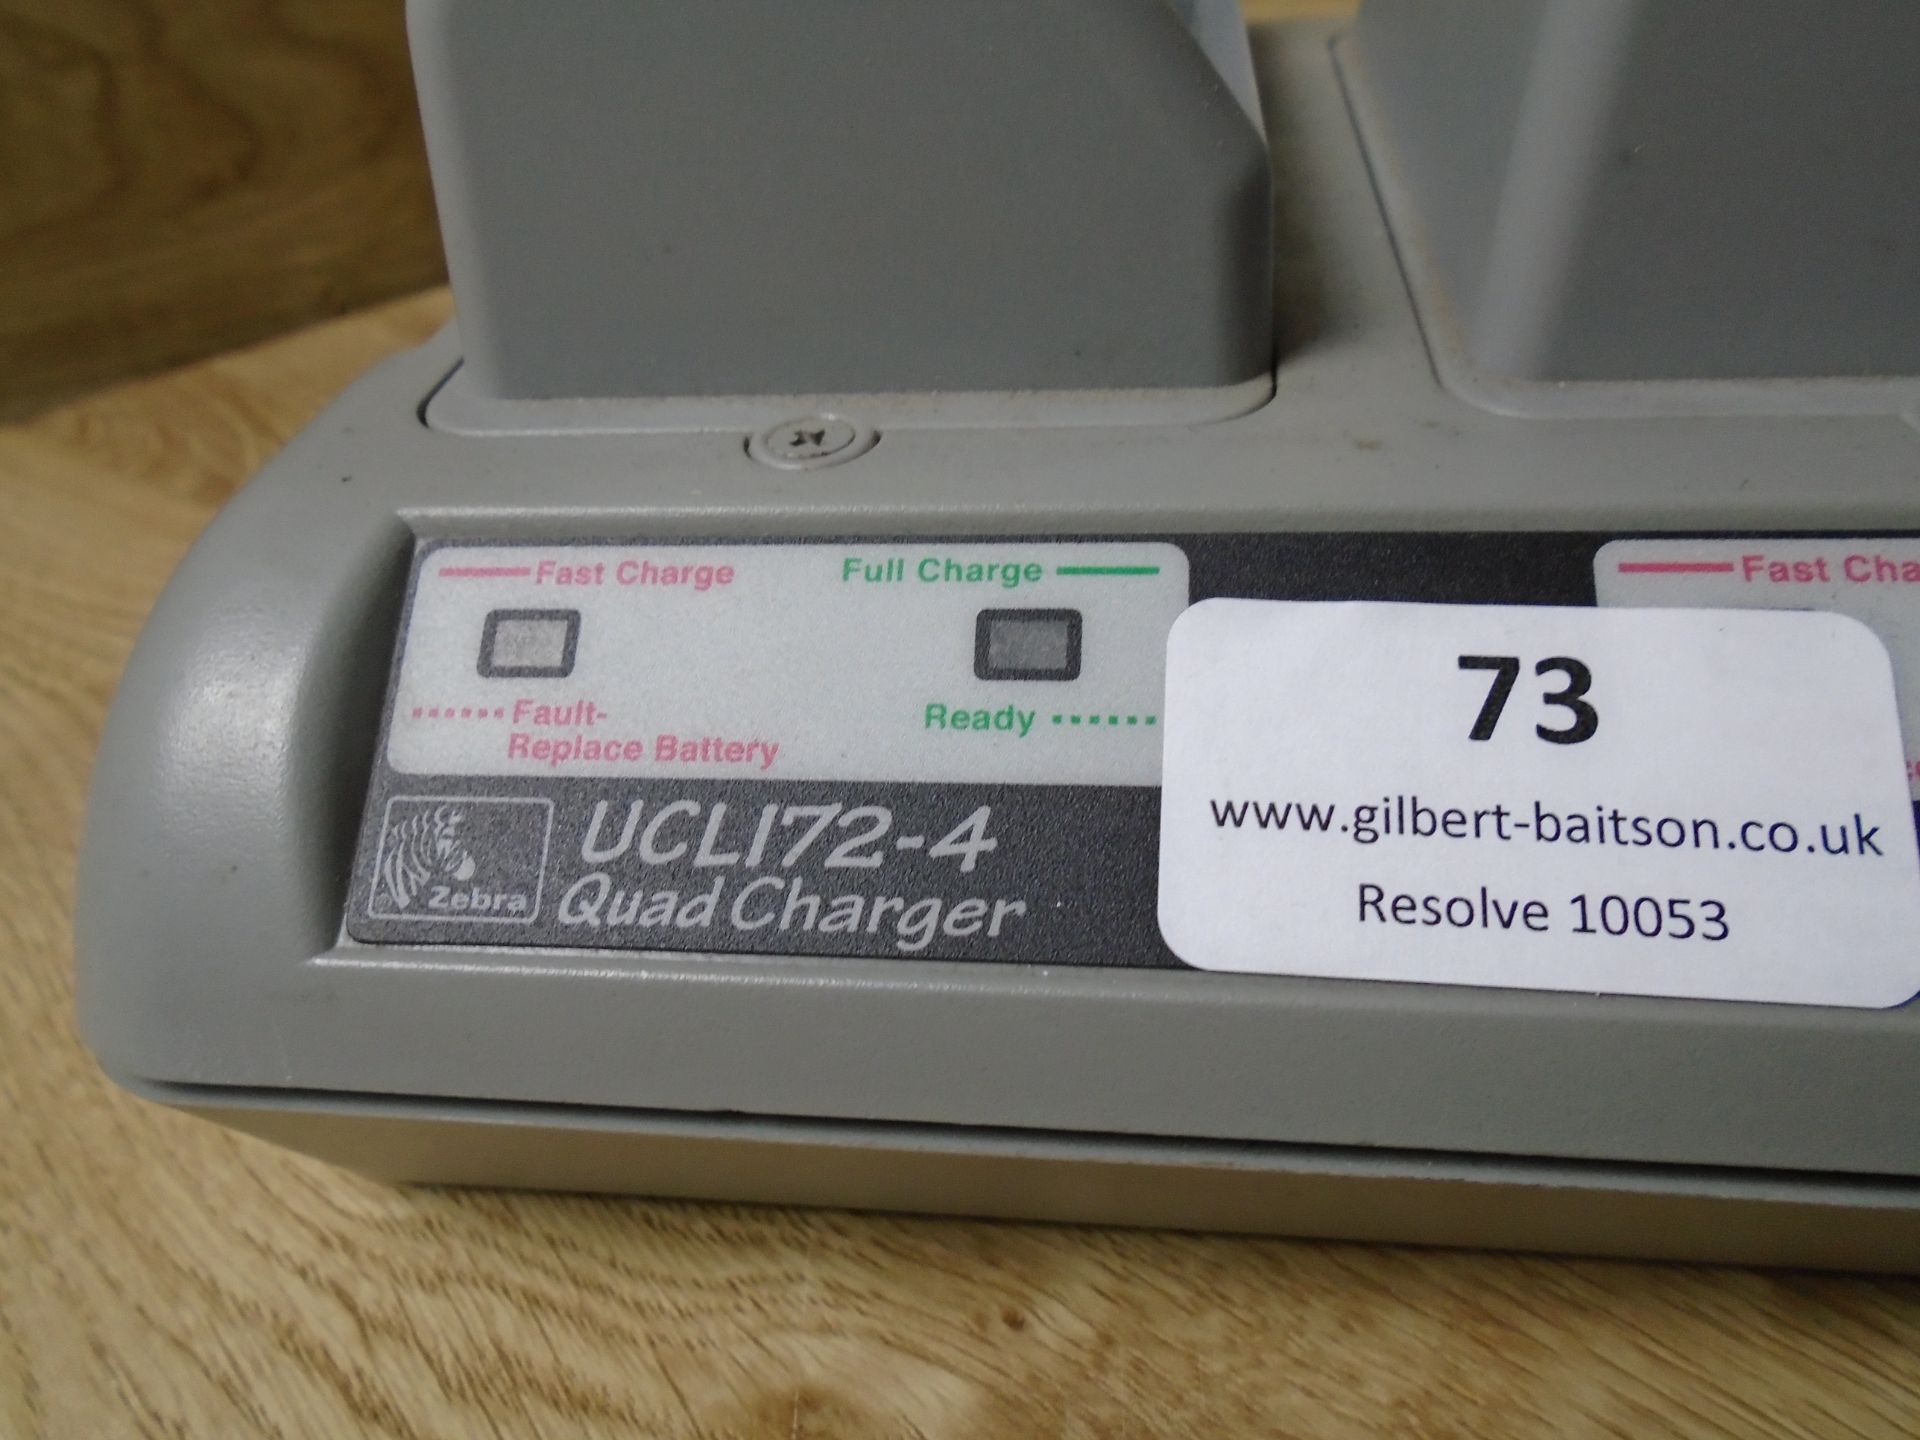 * UCL172-4 Quad Charger with 4 batteries - Image 2 of 2